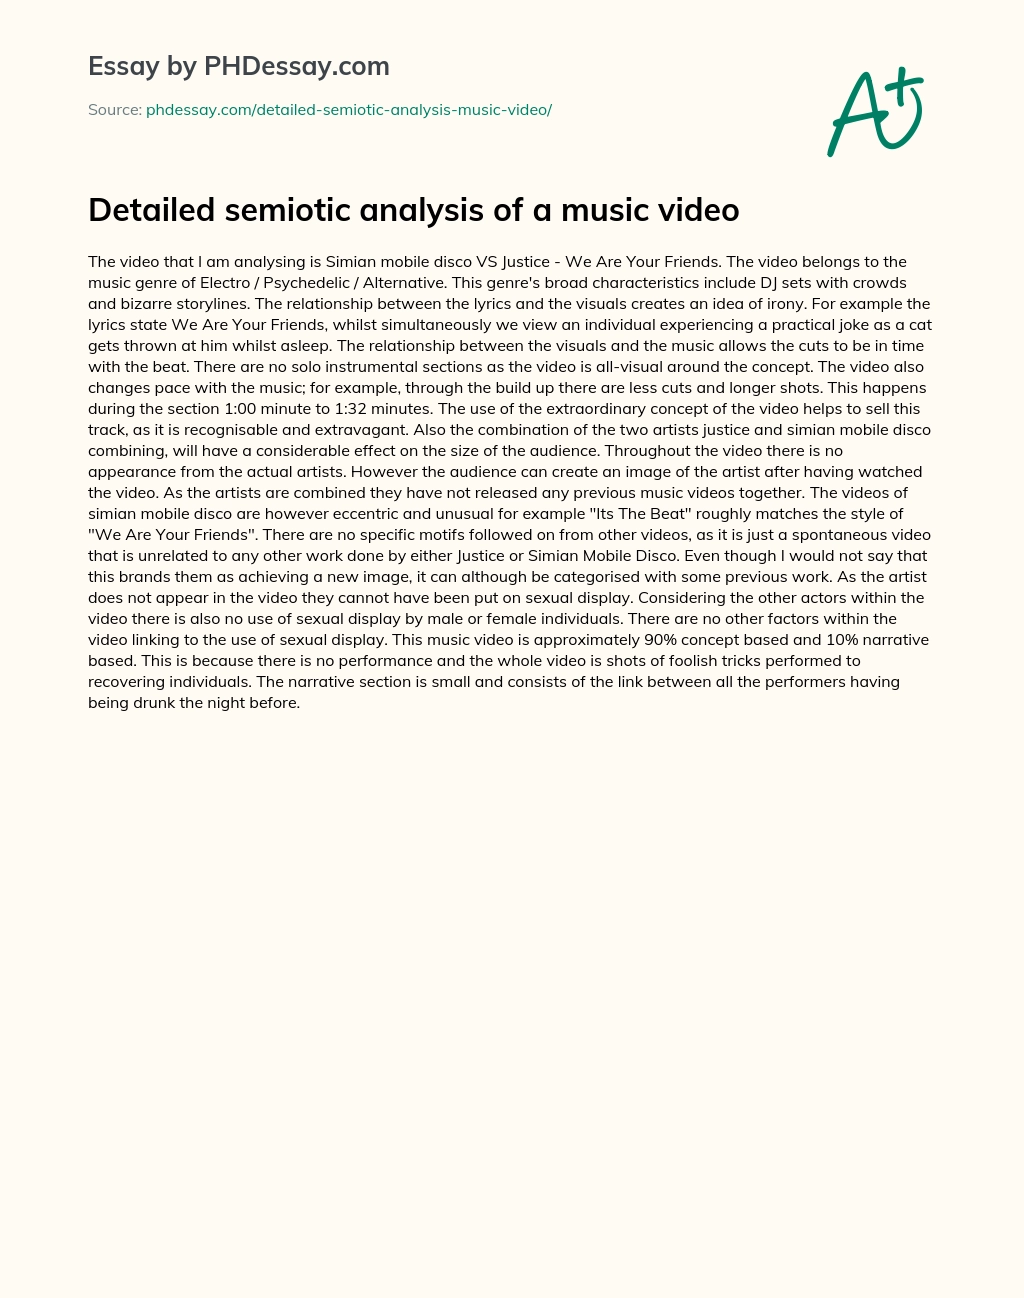 Detailed semiotic analysis of a music video essay